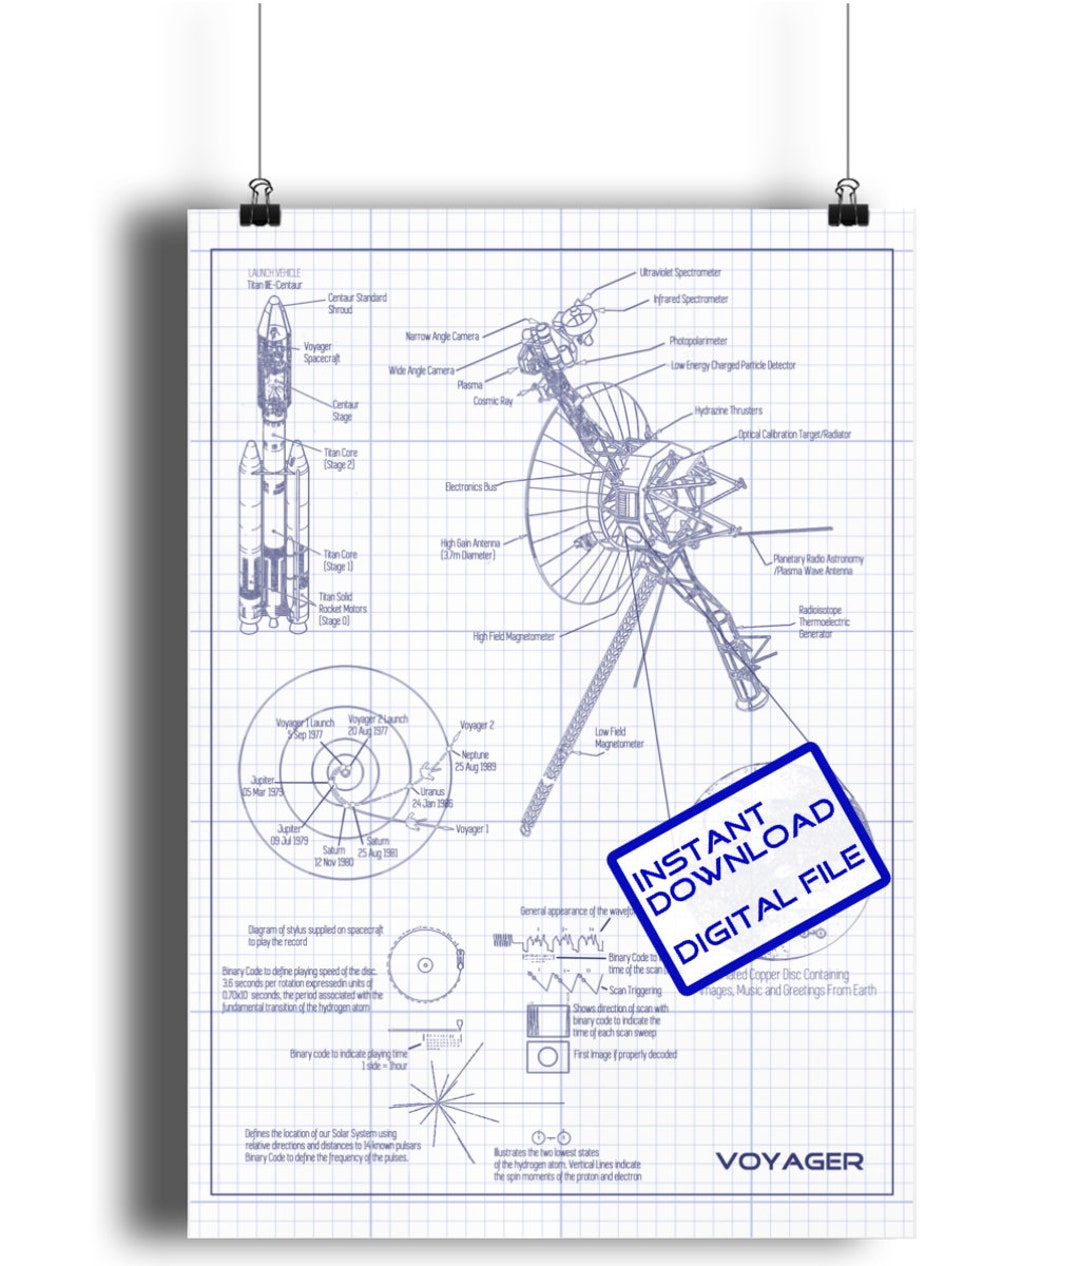 most awesome spacecraft diagram